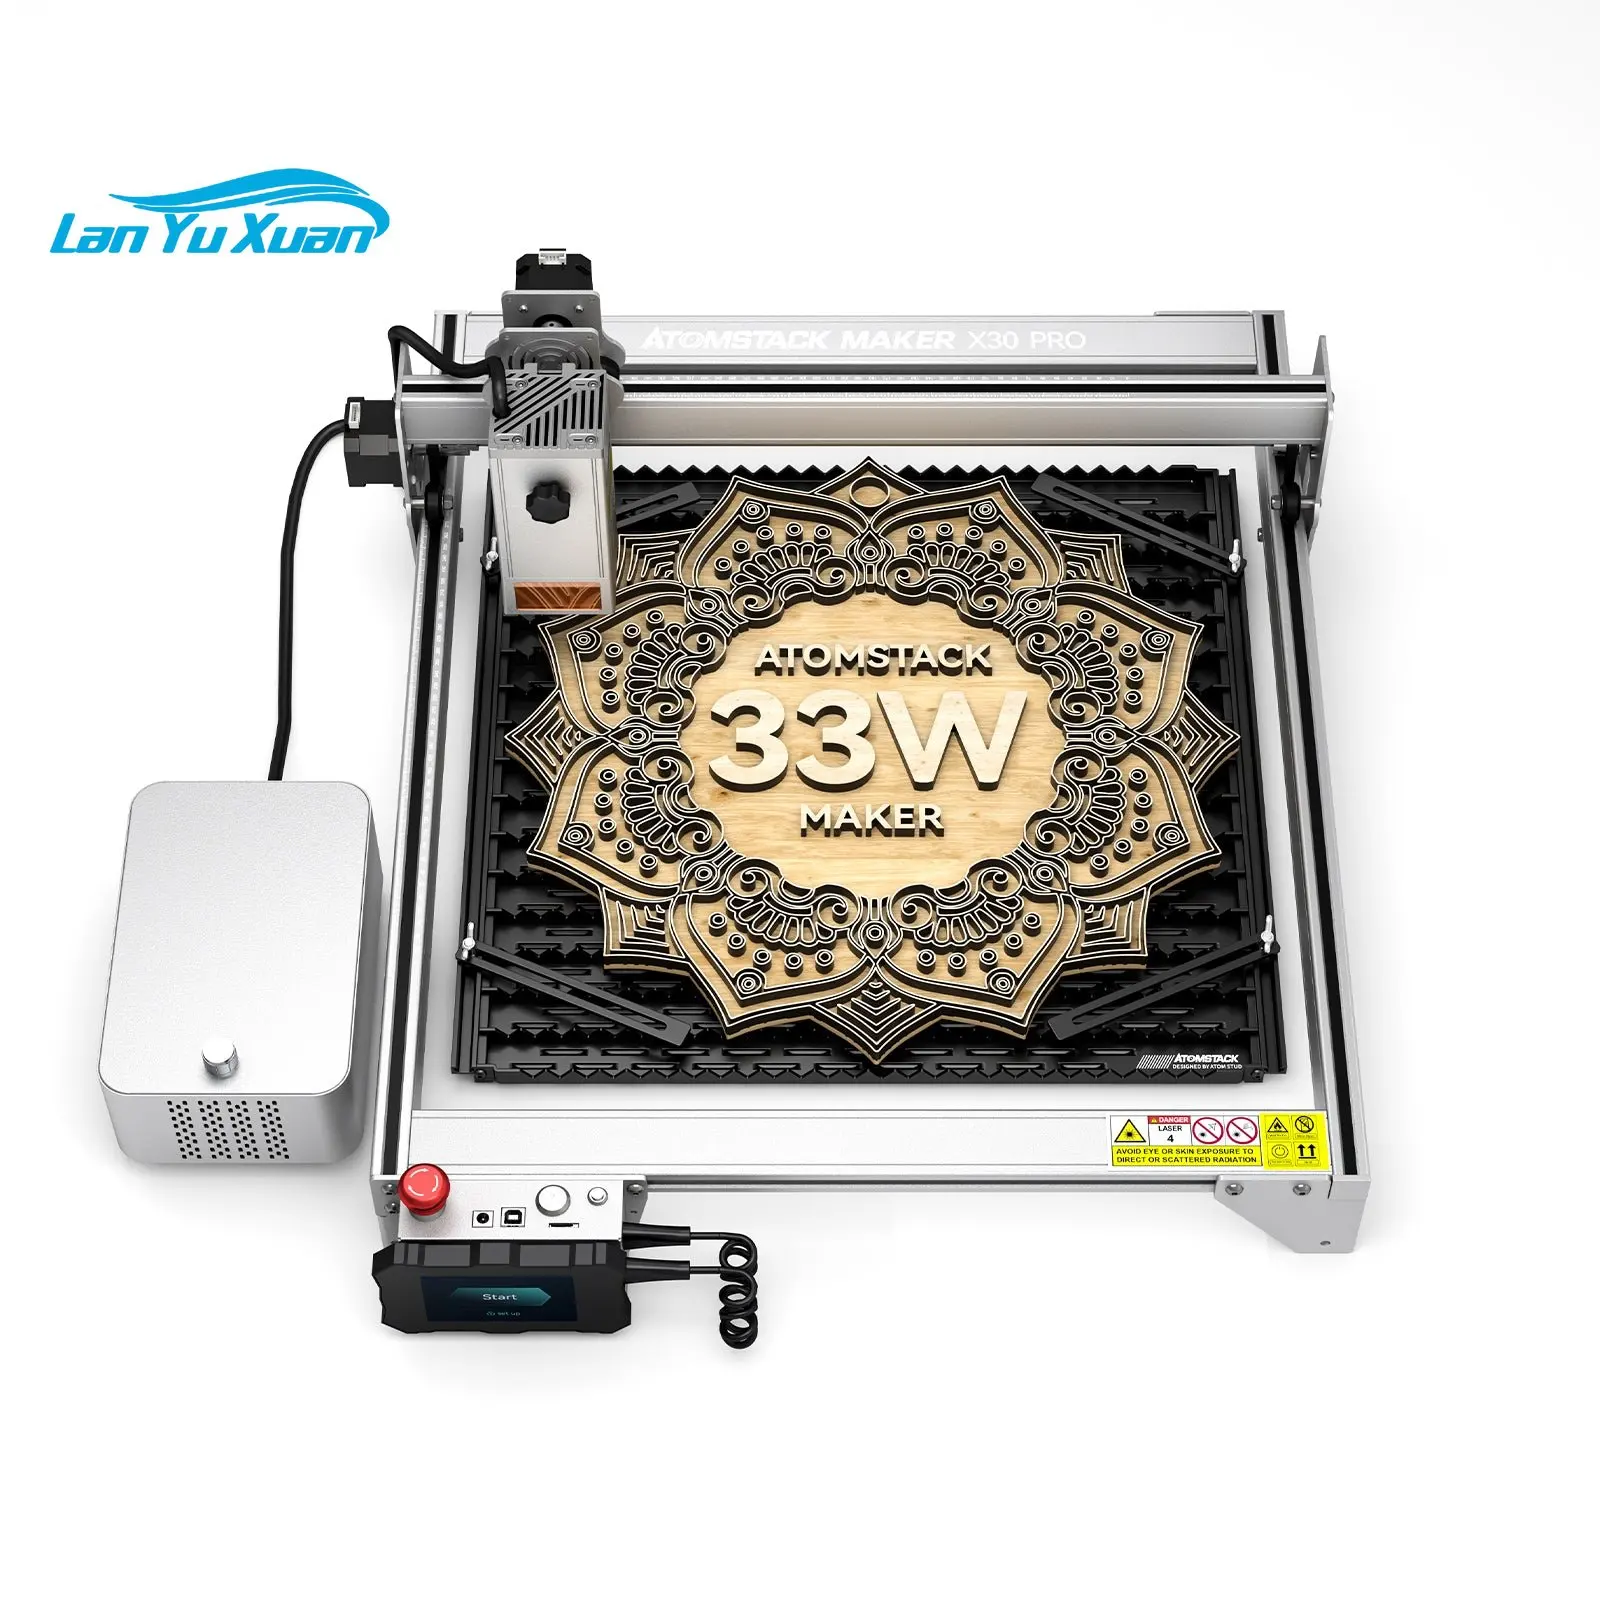 

New Hot Atomstack X30 Pro 160W 6-core Laser Engraver Built In Air Assist Pump Compressor Metal Wood Engraving Cutting Machine